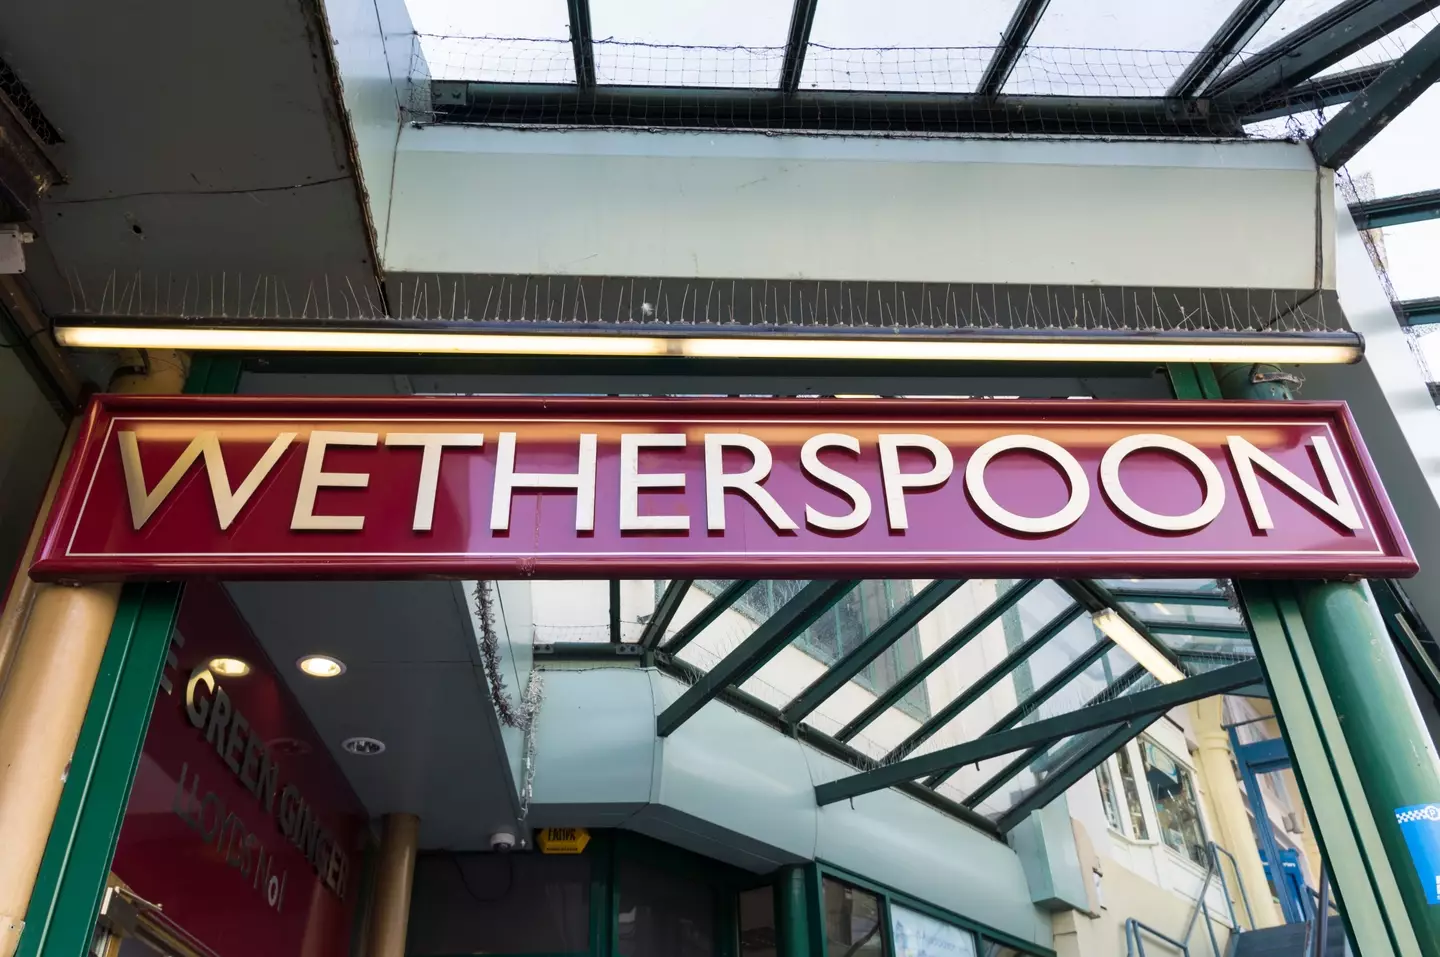 You're never that far from your nearest Wetherspoon.